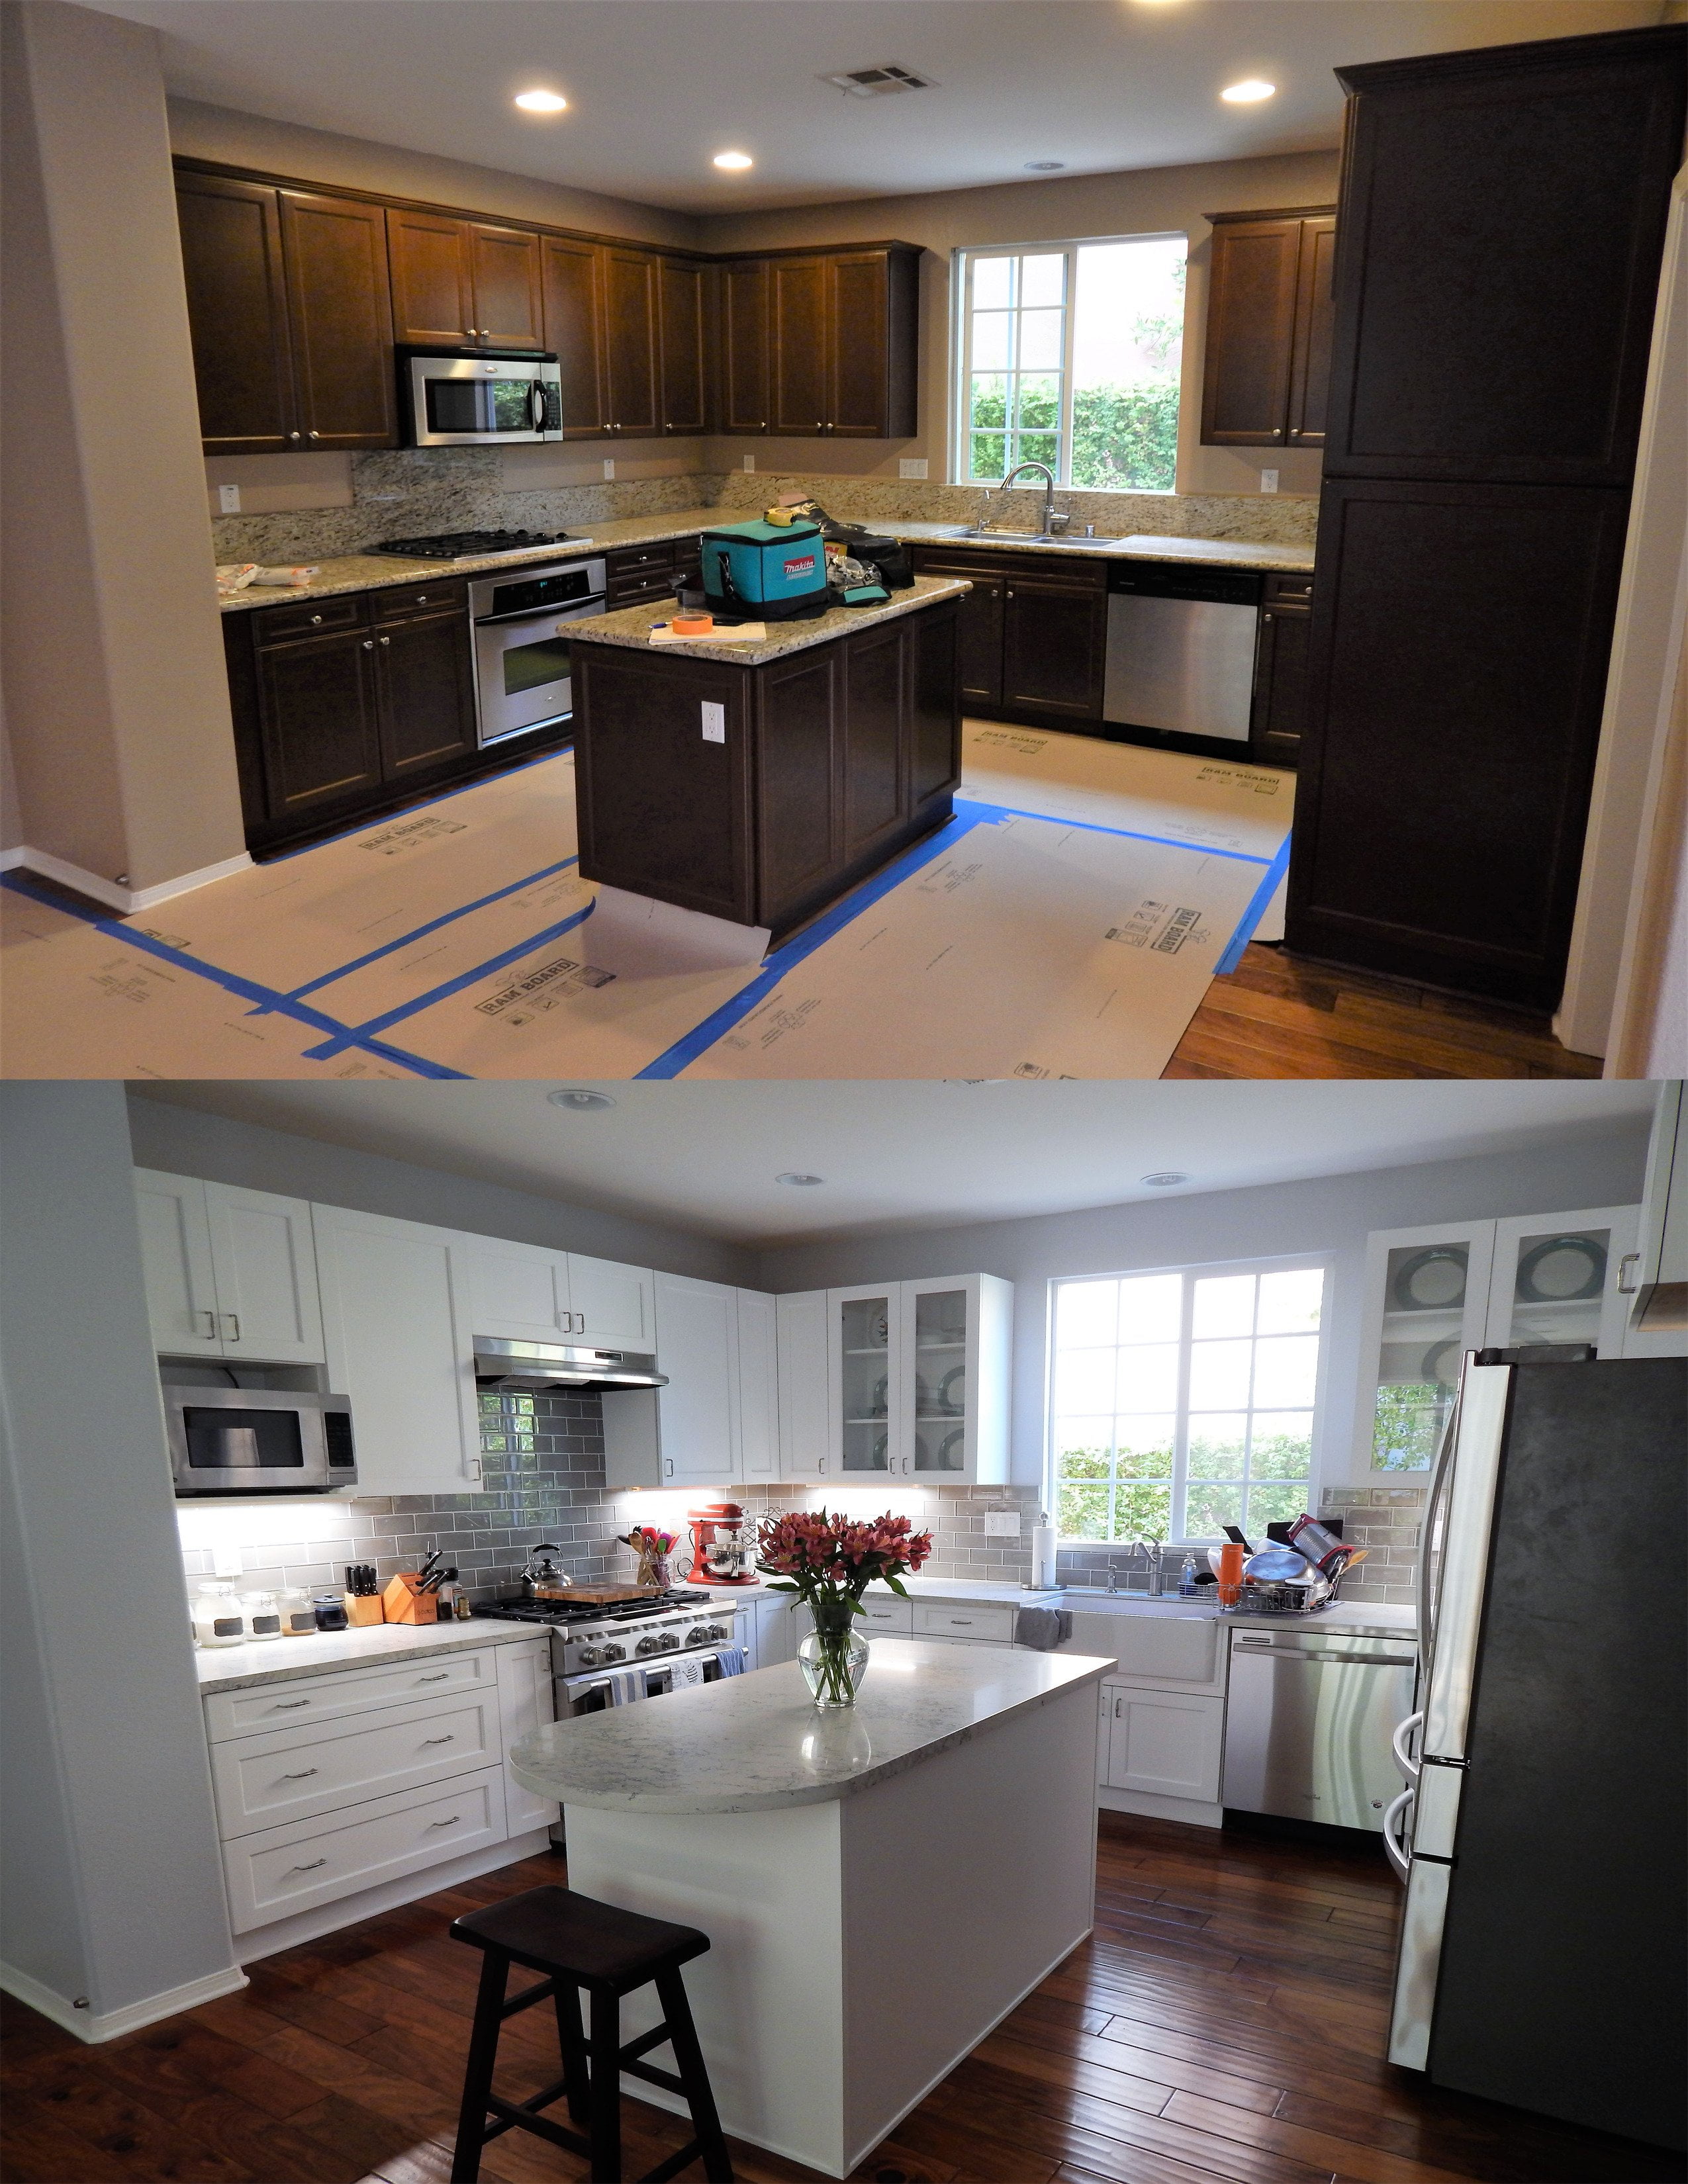 Kitchen Before & After